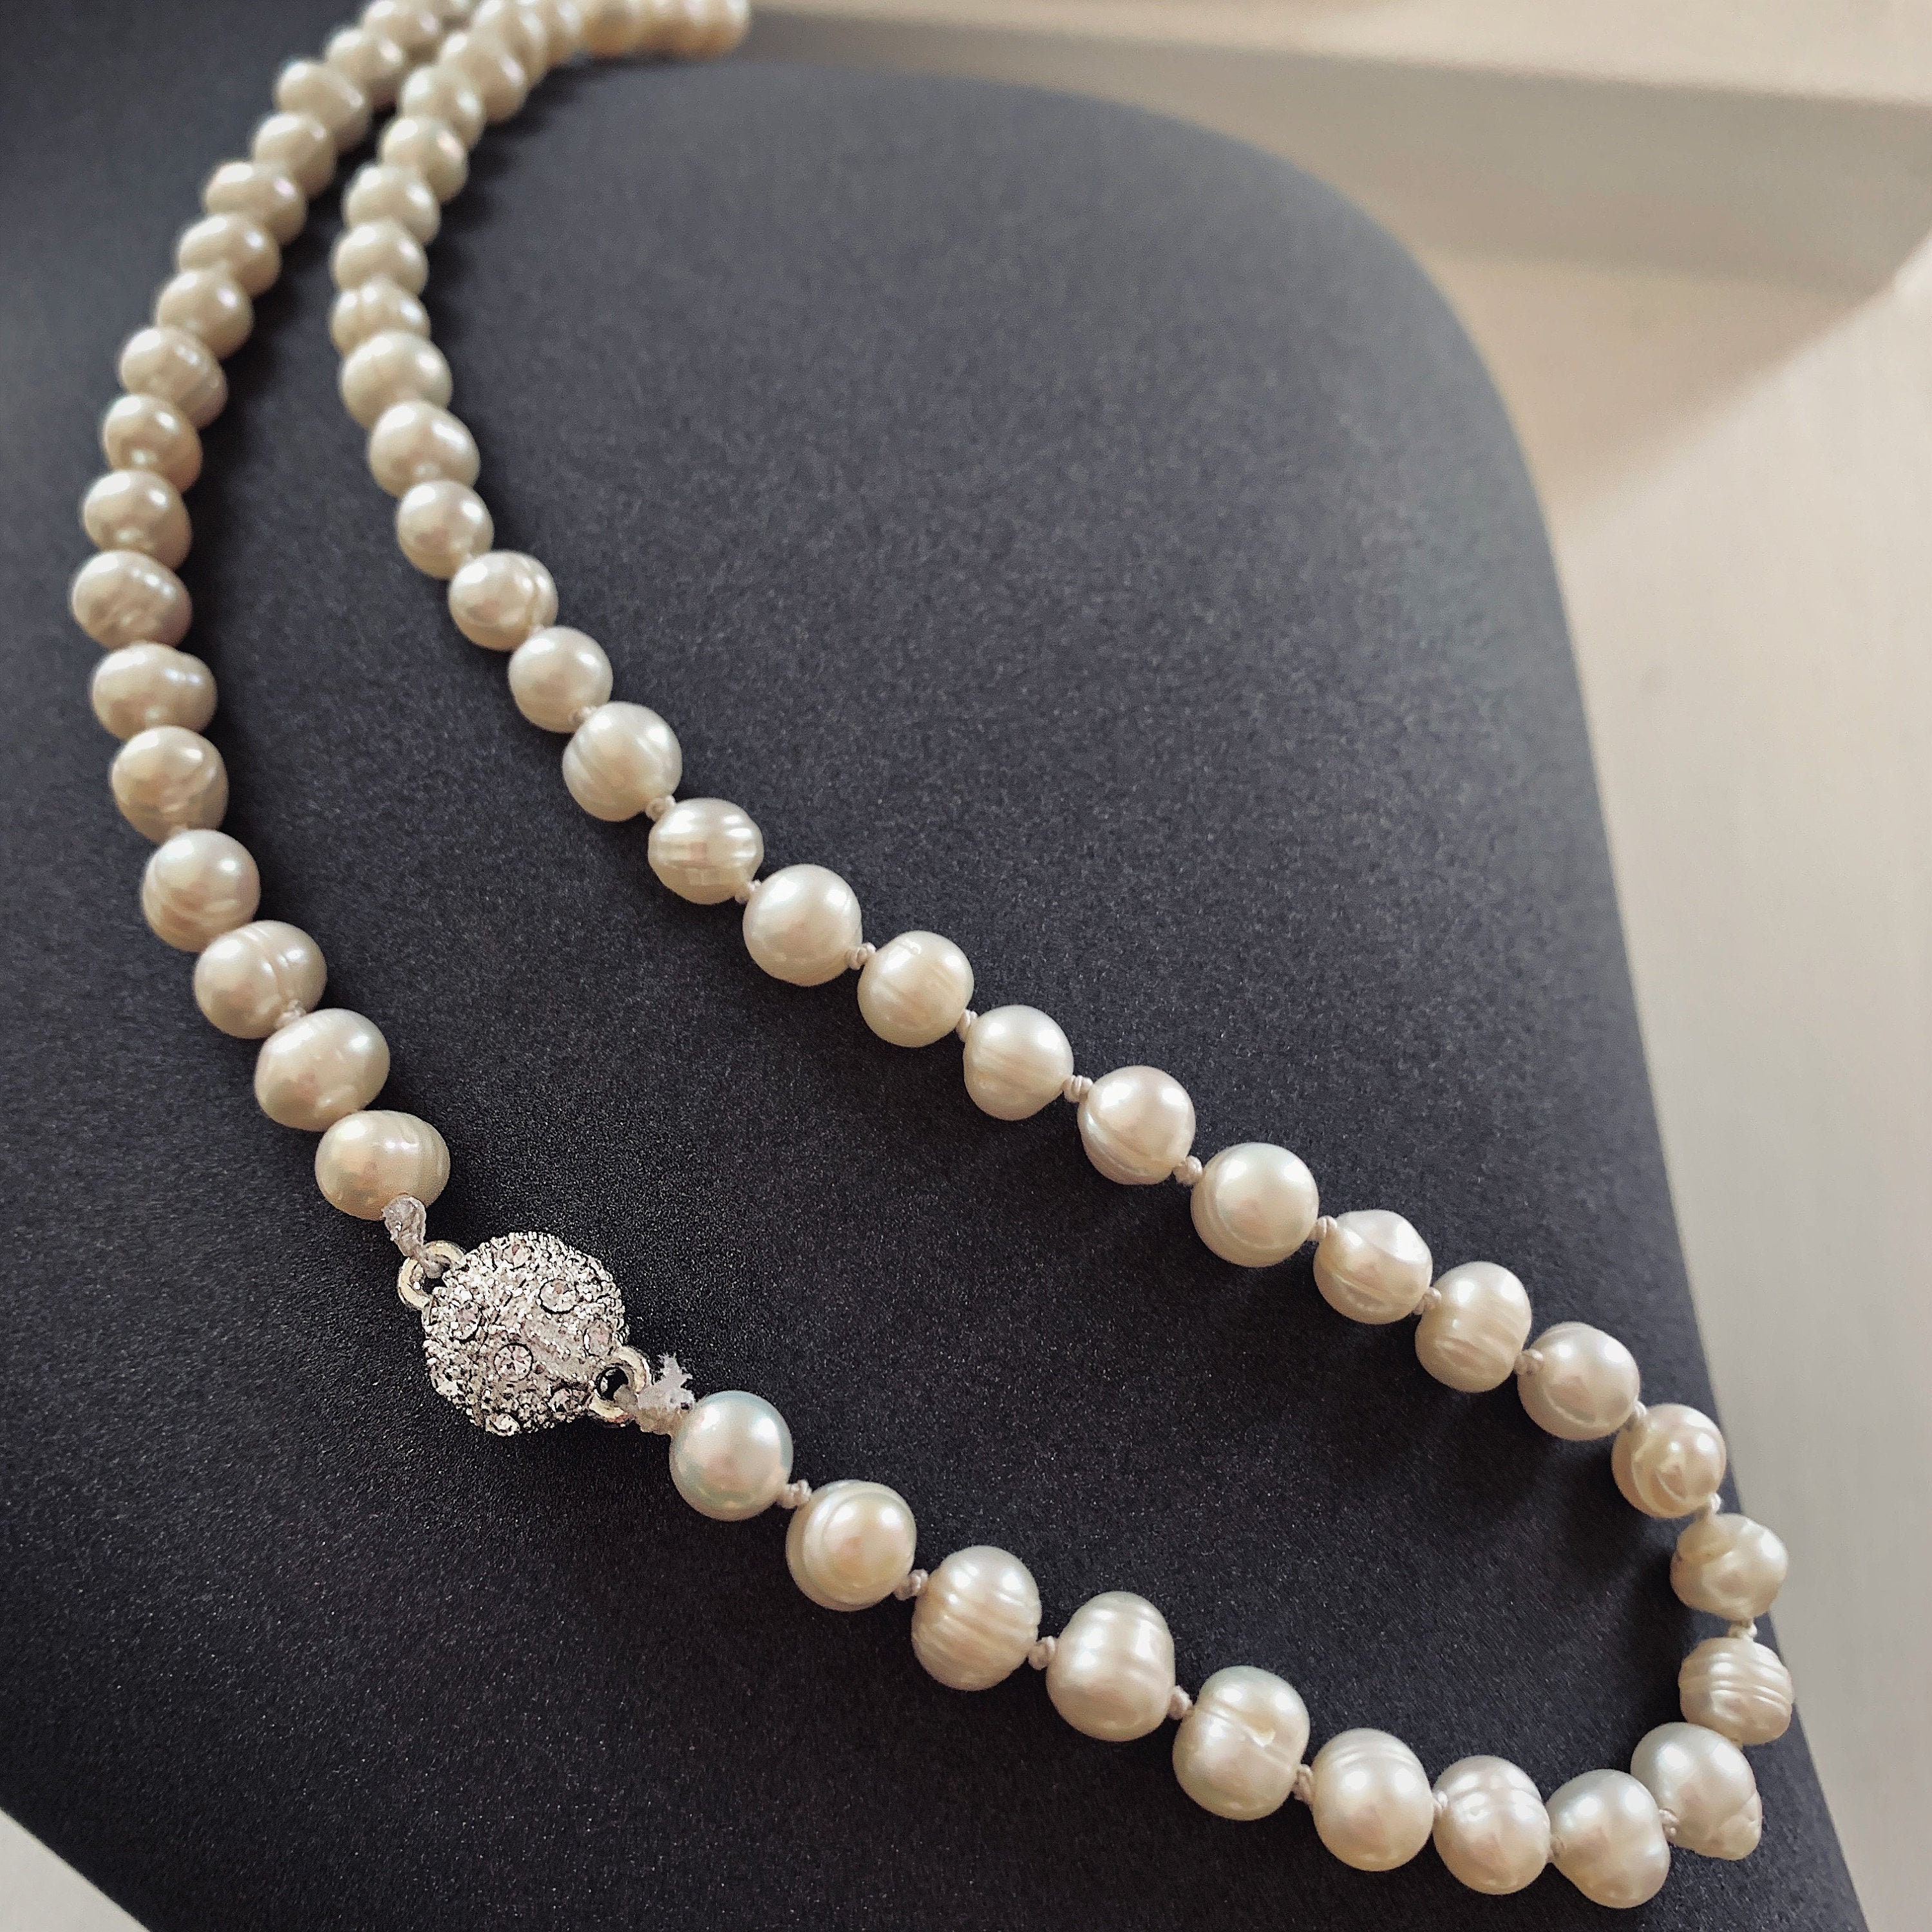 Long pendant necklace - Metal, imitation pearls & strass, silver, black, pearly  white & crystal — Fashion